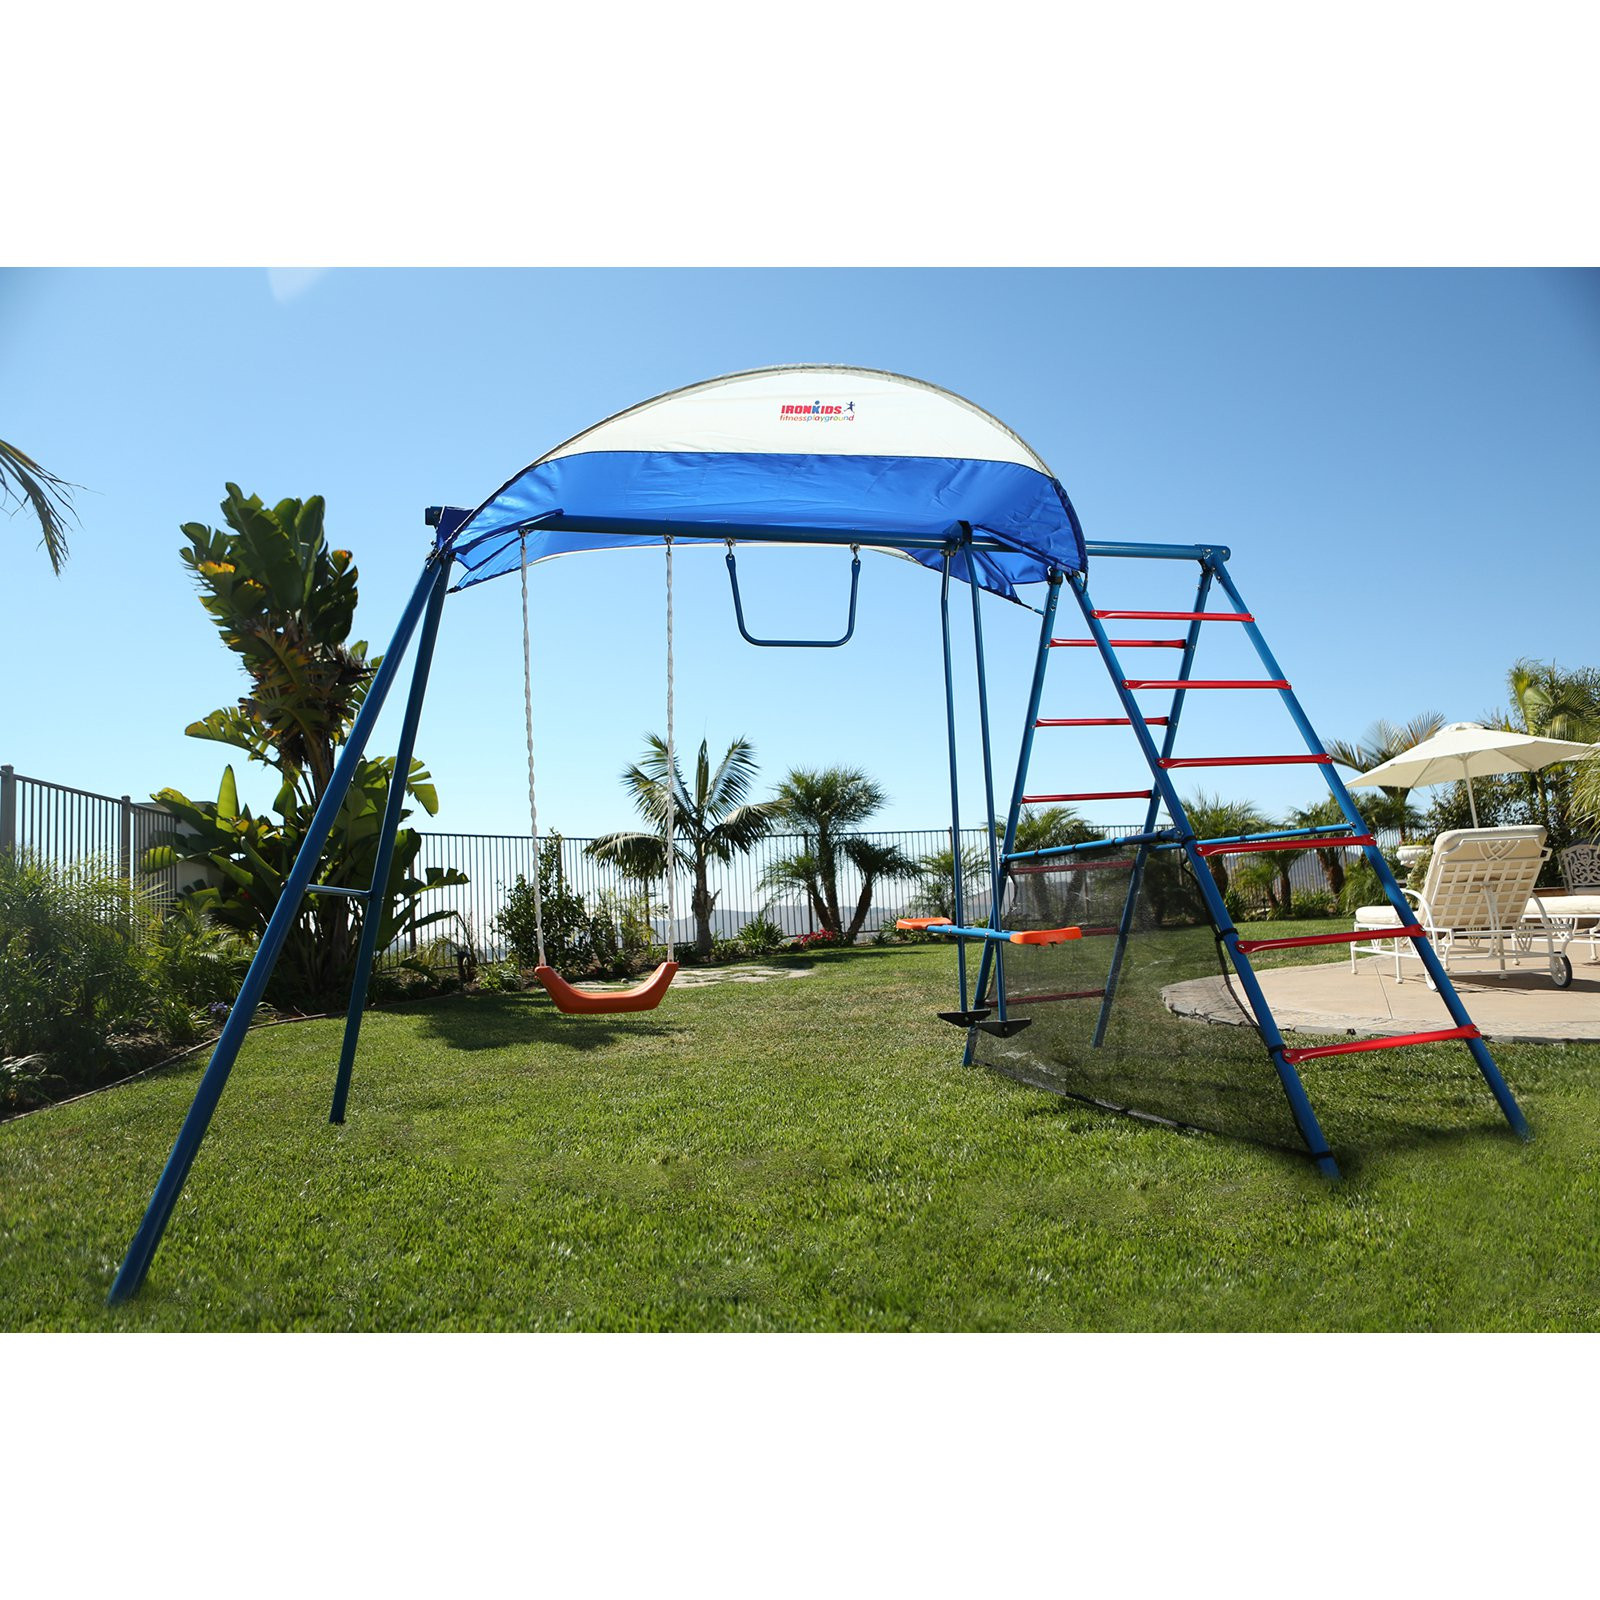 Iron Kids Swing Sets Unique Ironkids Inspiration 100 Metal Swing Set with Ladder